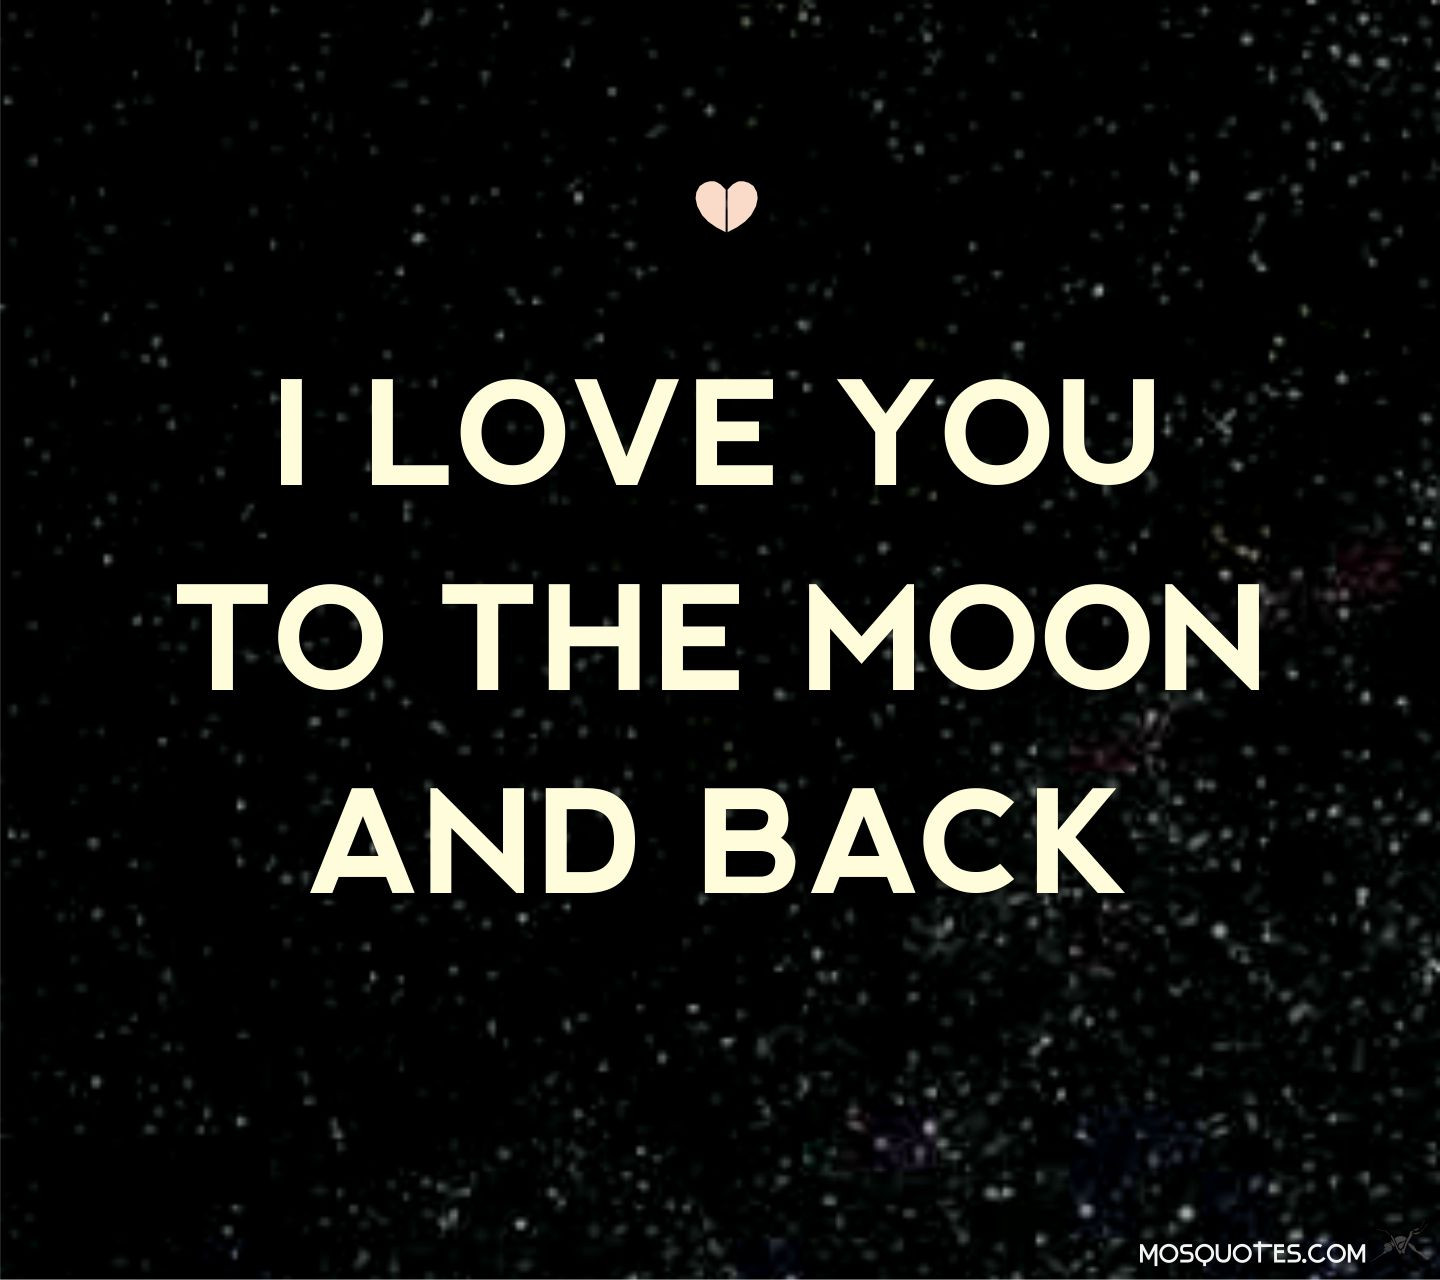 I Love You To The Moon And Back Quotes
 Take You To The Moon And Back Quotes QuotesGram